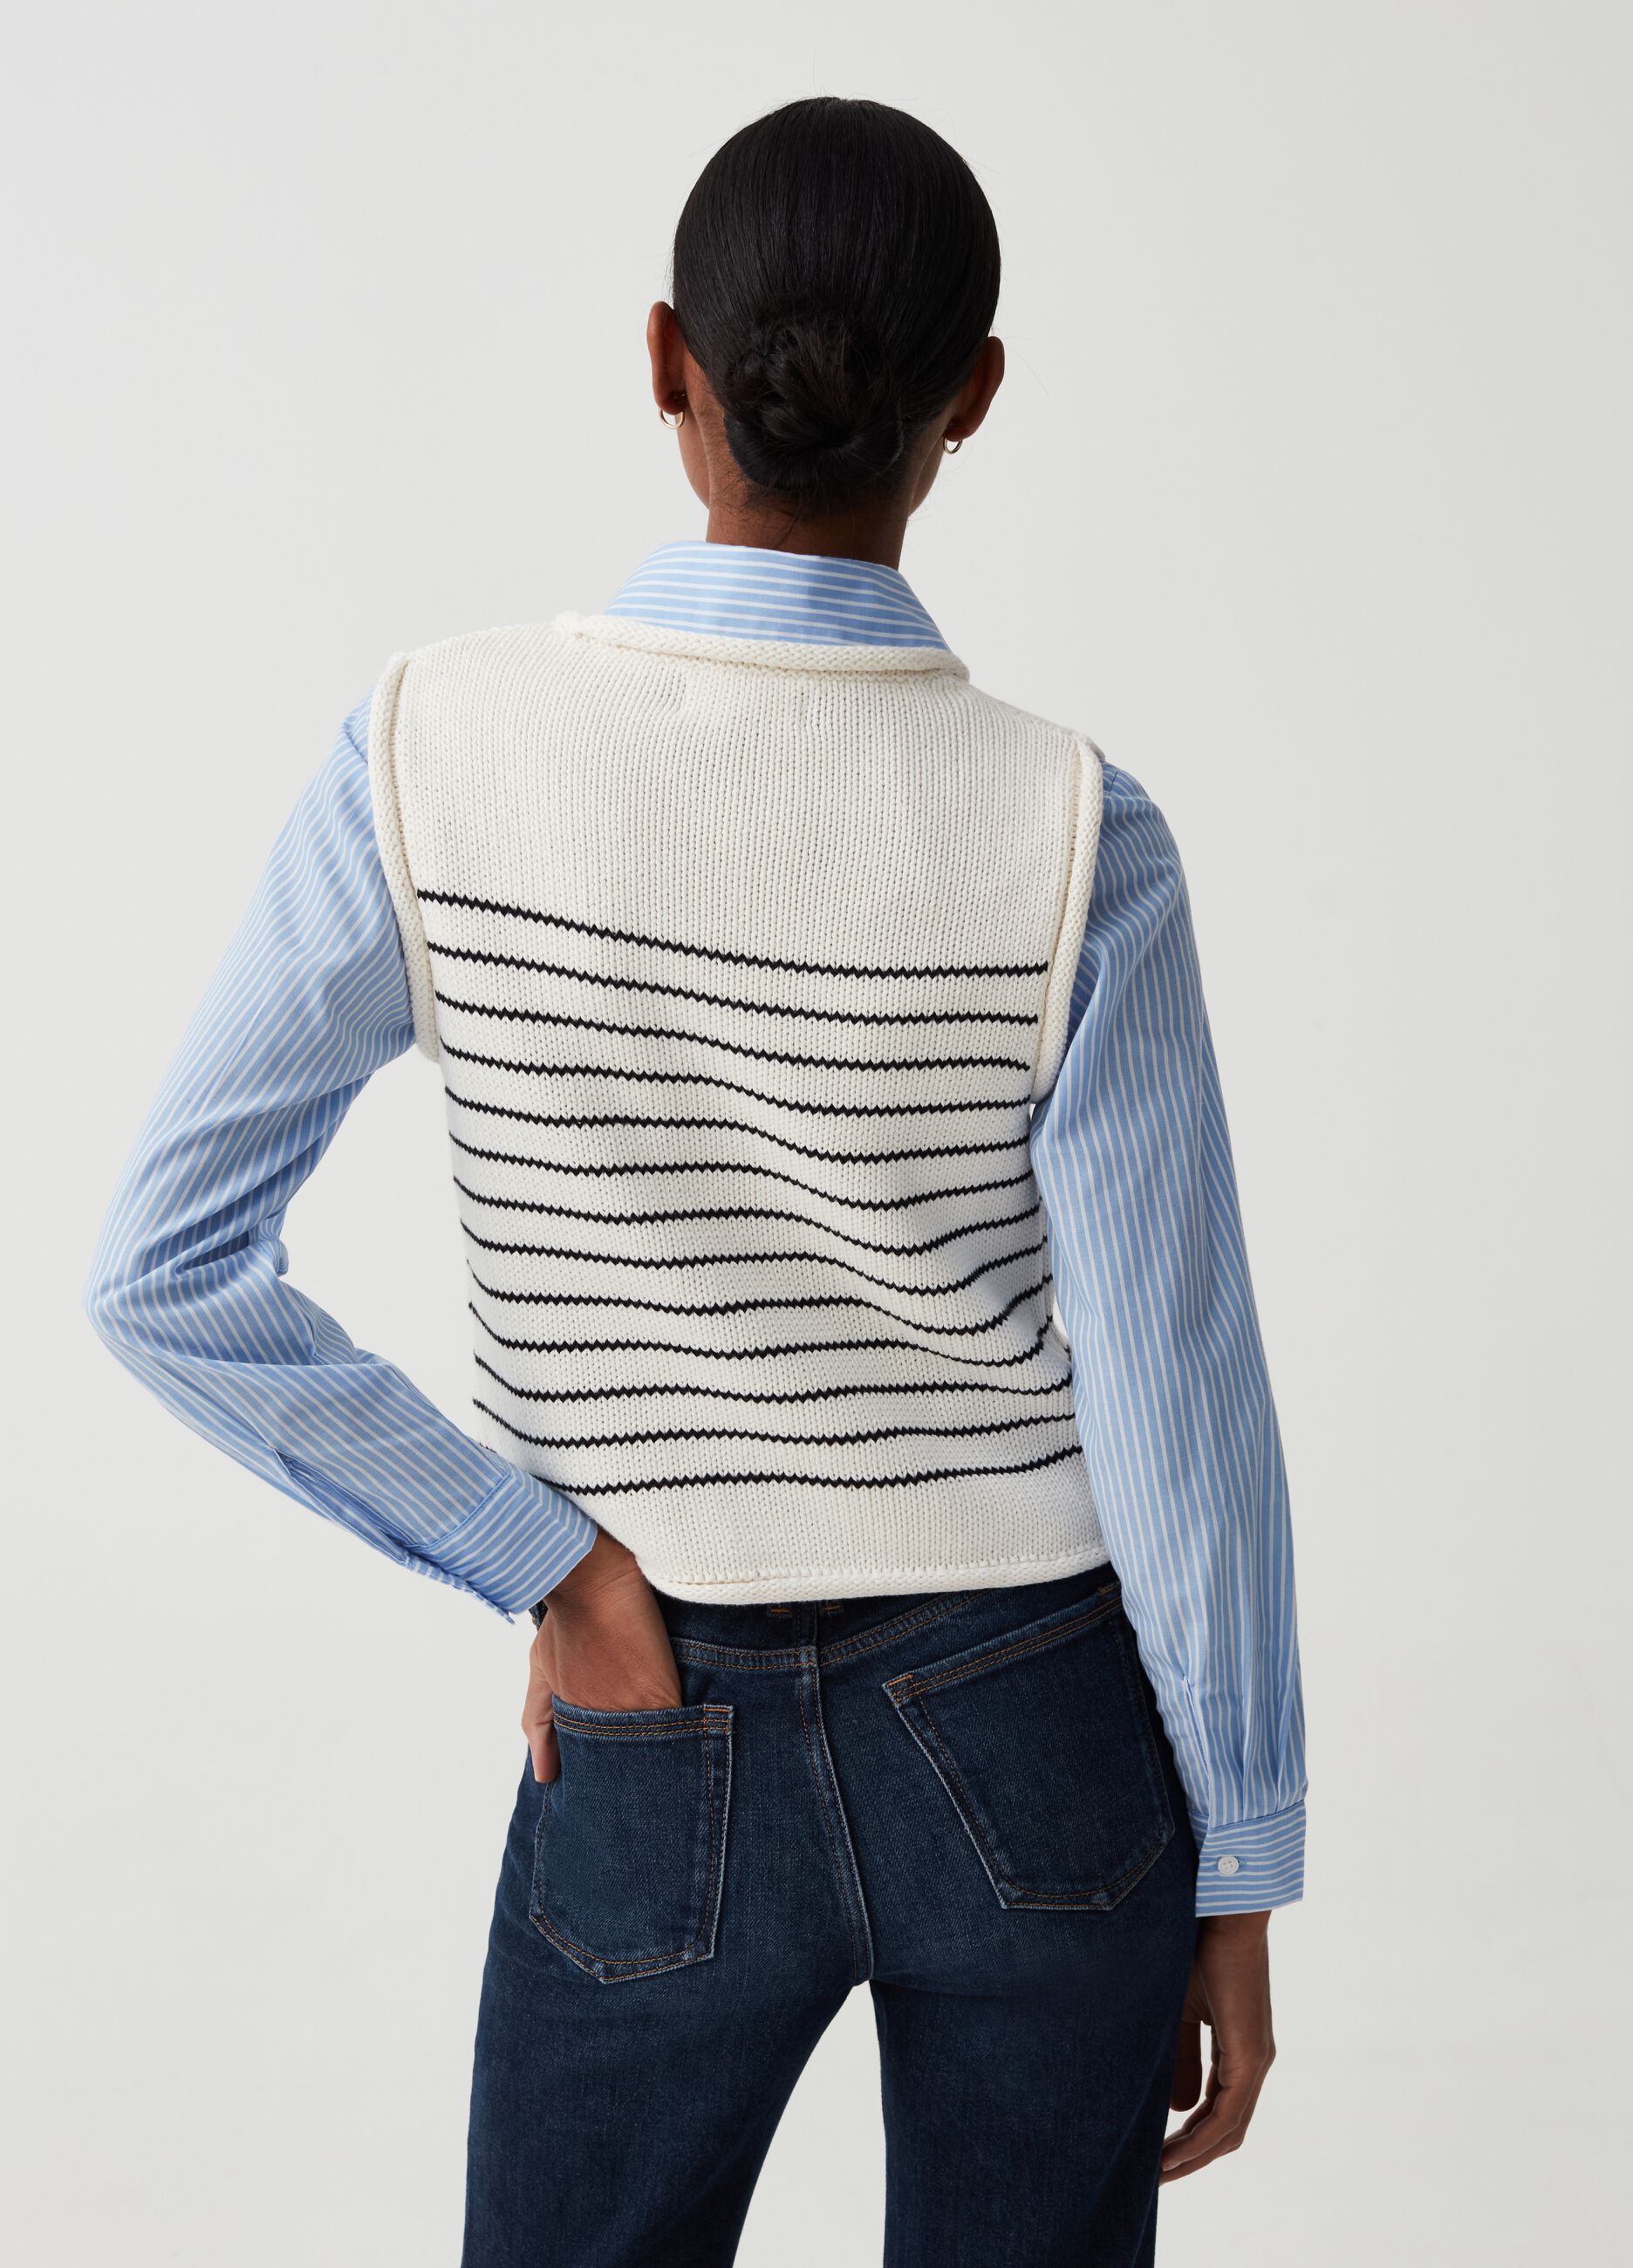 Closed gilet with striped jacquard motif